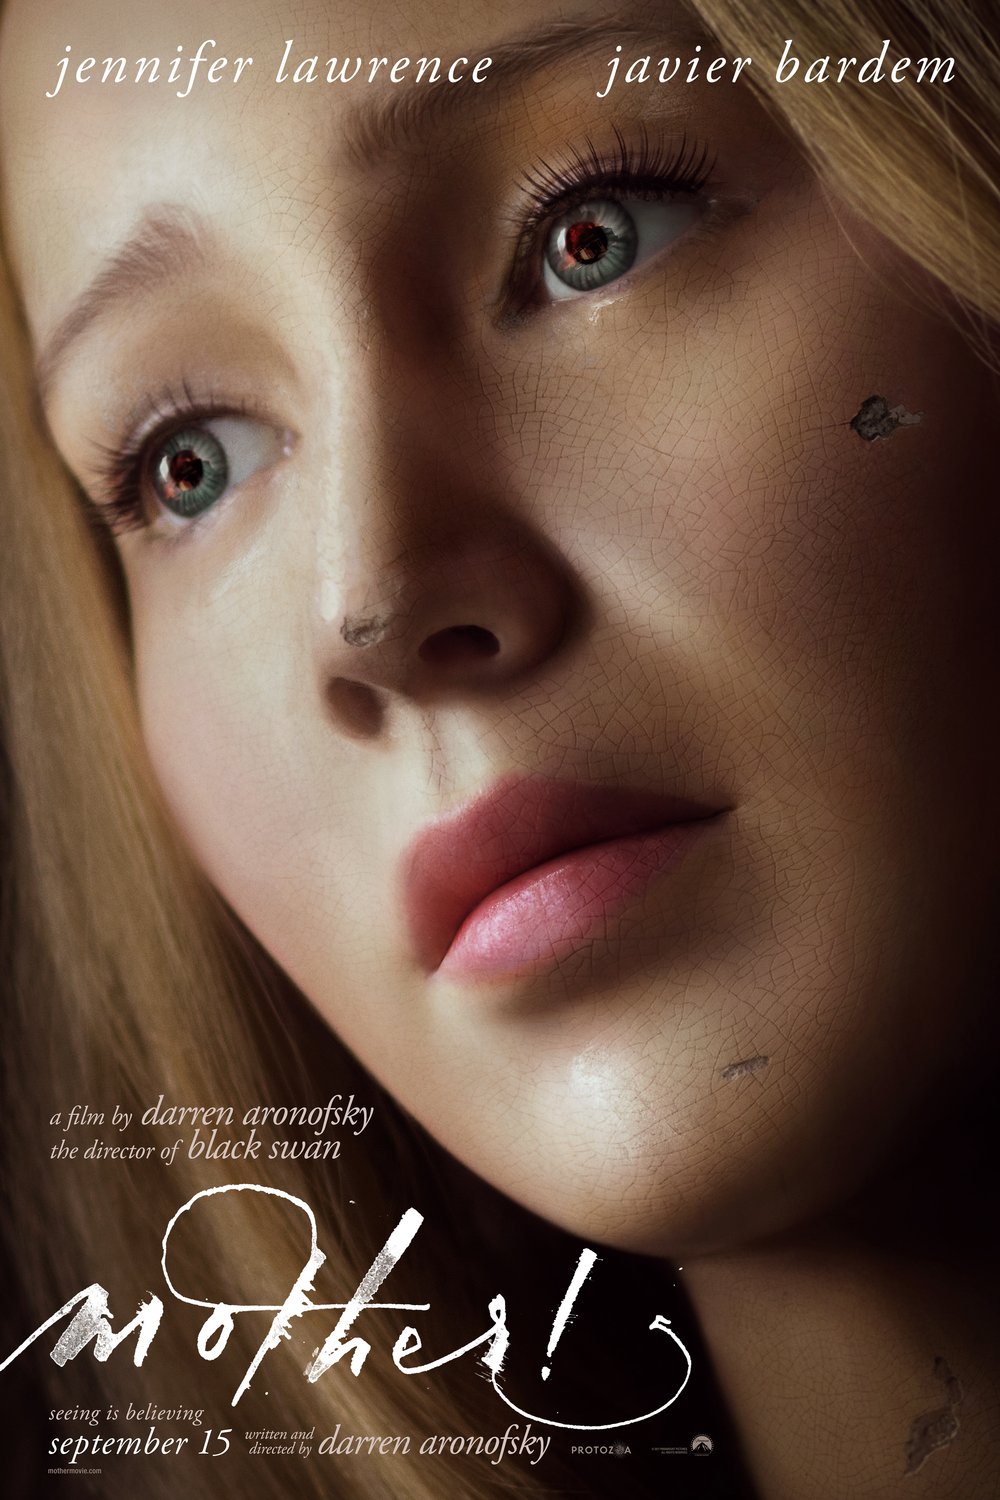 Poster of the movie Mother!